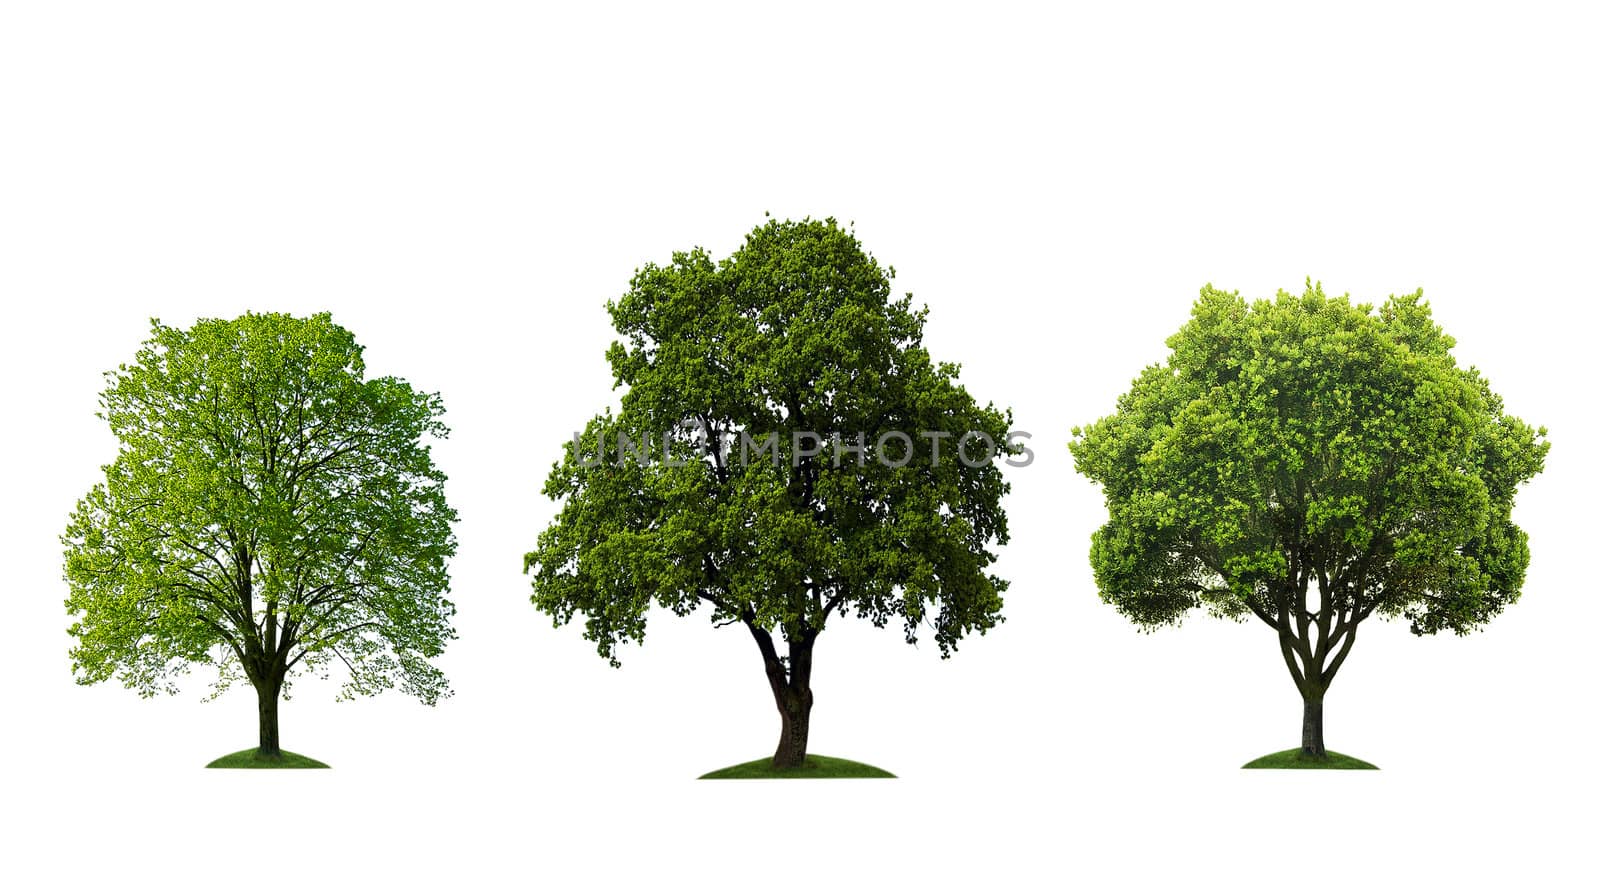 Green trees isolated on a white background